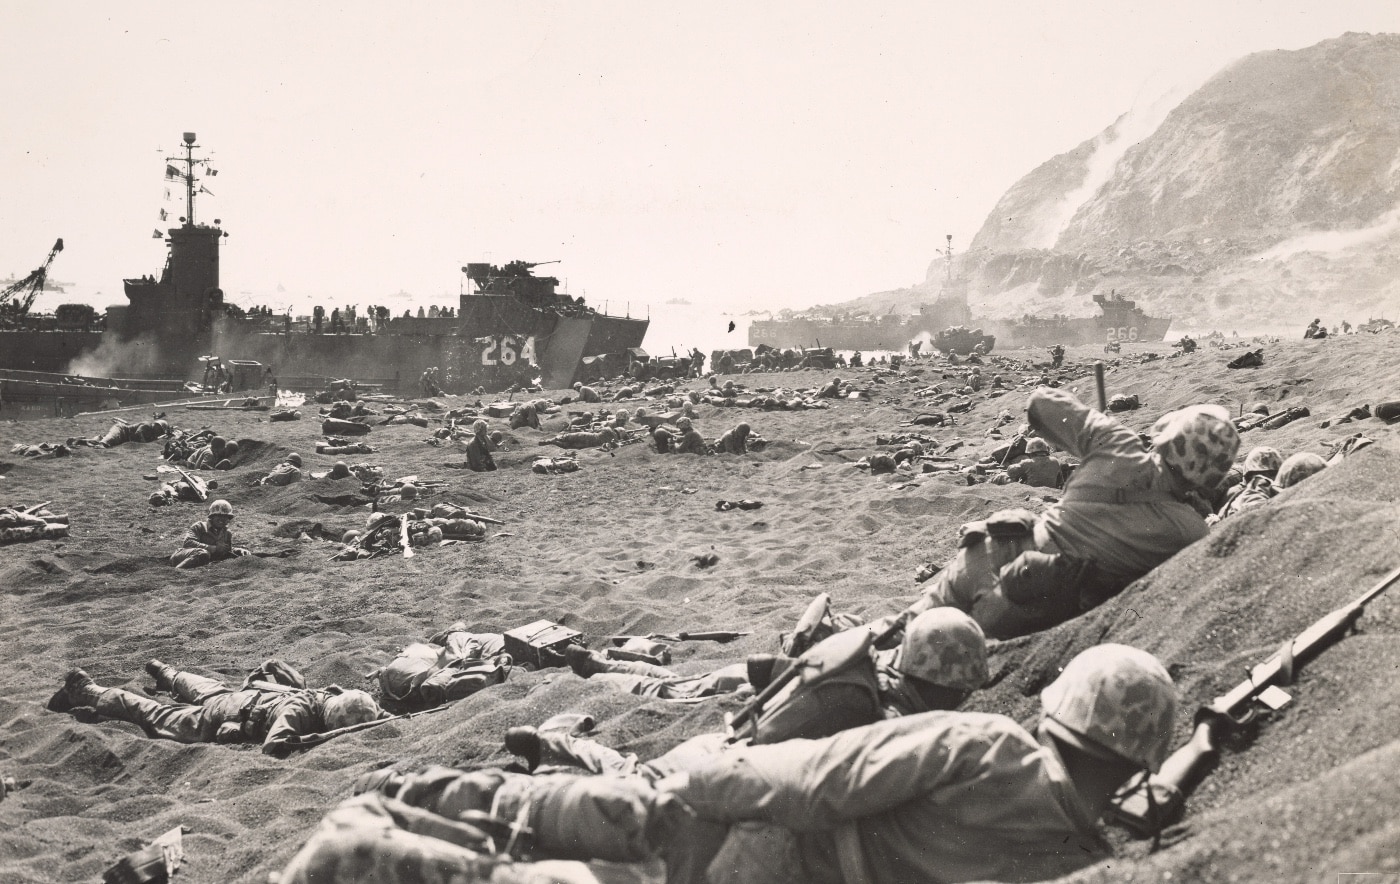 In this photo, we see United States Marines on the black sand beach of Iwo Jima. Iwo Jima was part of the leapfrogging strategy of the United State in World War 2. Leapfrogging, also known as island hopping, was an amphibious military strategy employed by the Allies in the Pacific War against the Empire of Japan during World War II.